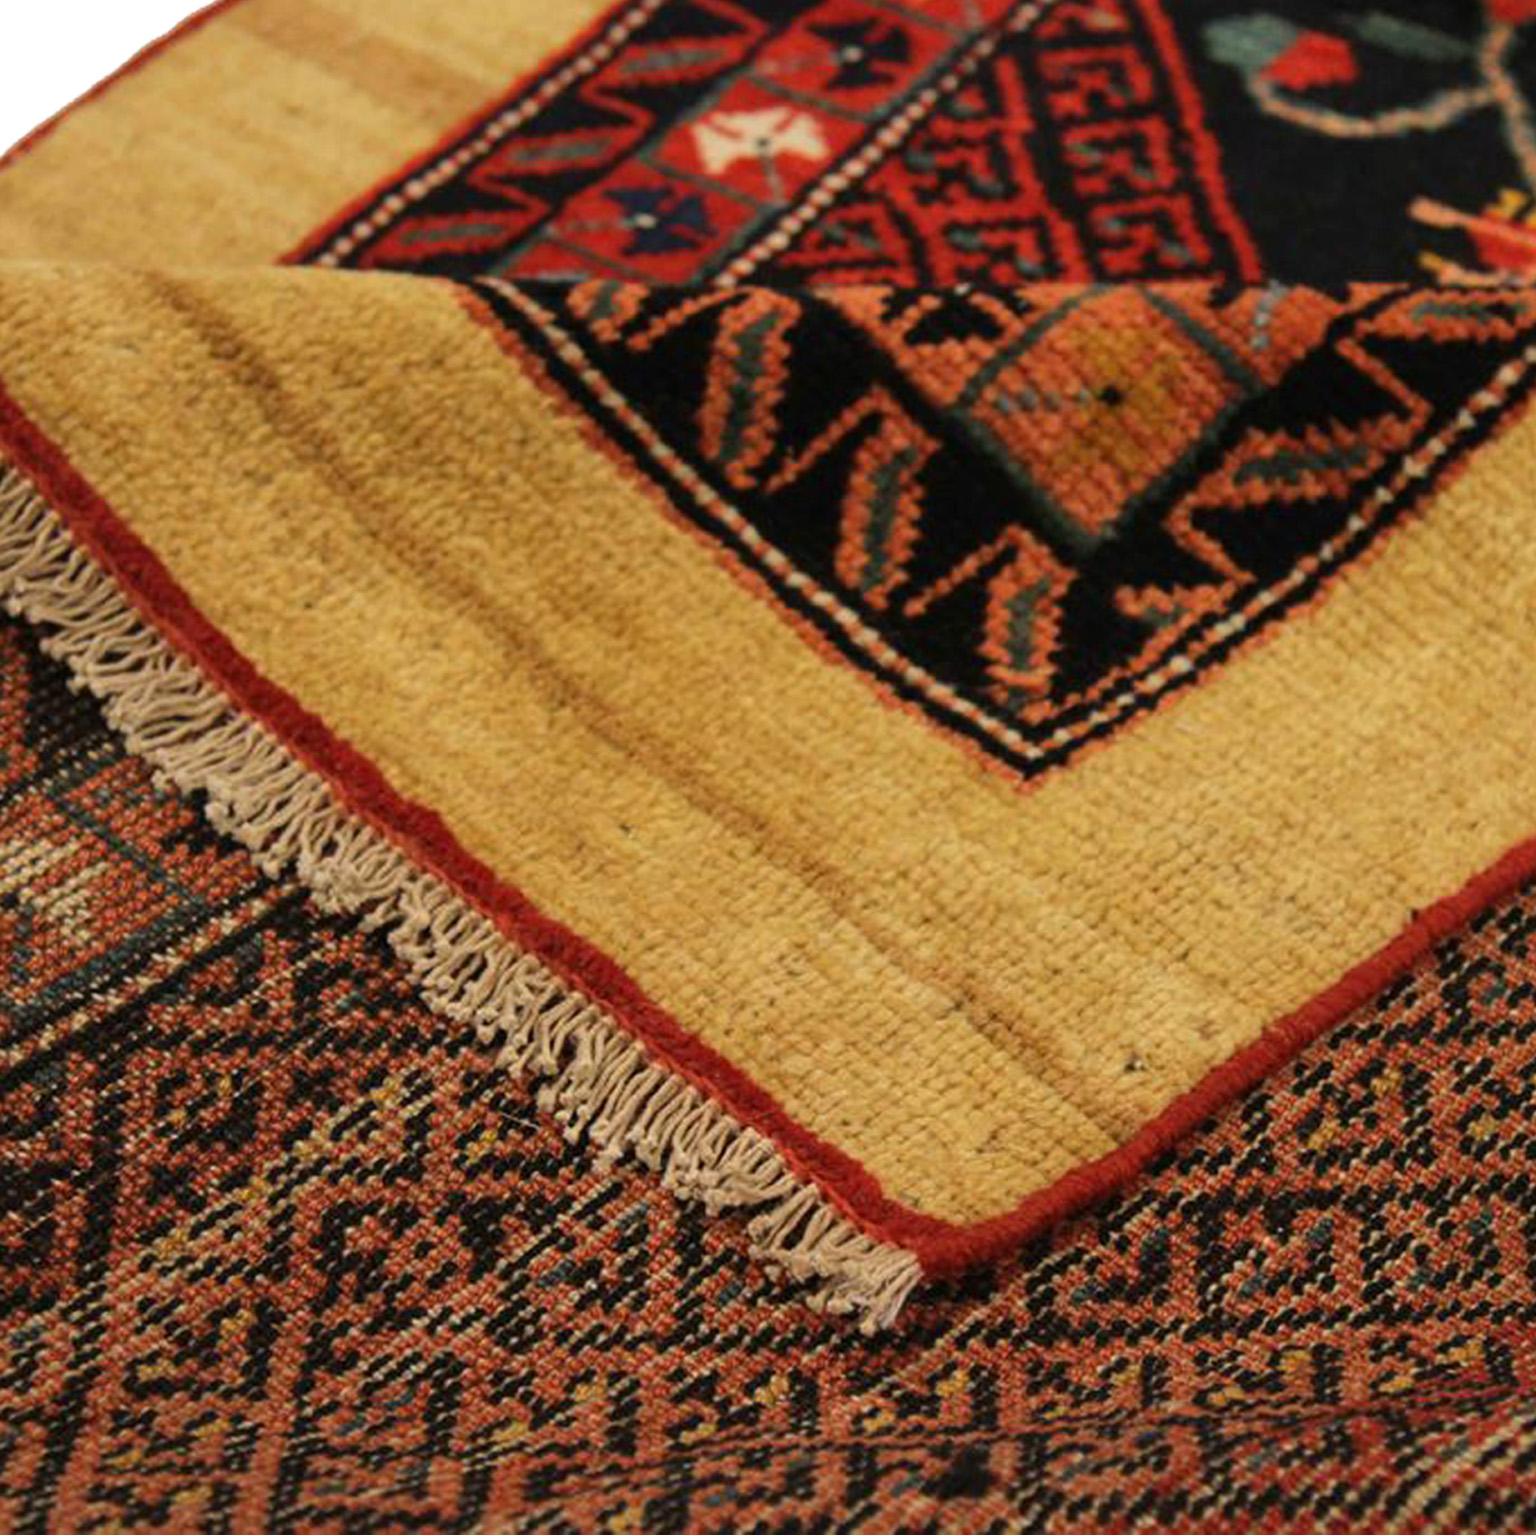 Other 1920s Antique Persian Rug Bakhtiari Style with Animal and Geometric Patterns For Sale